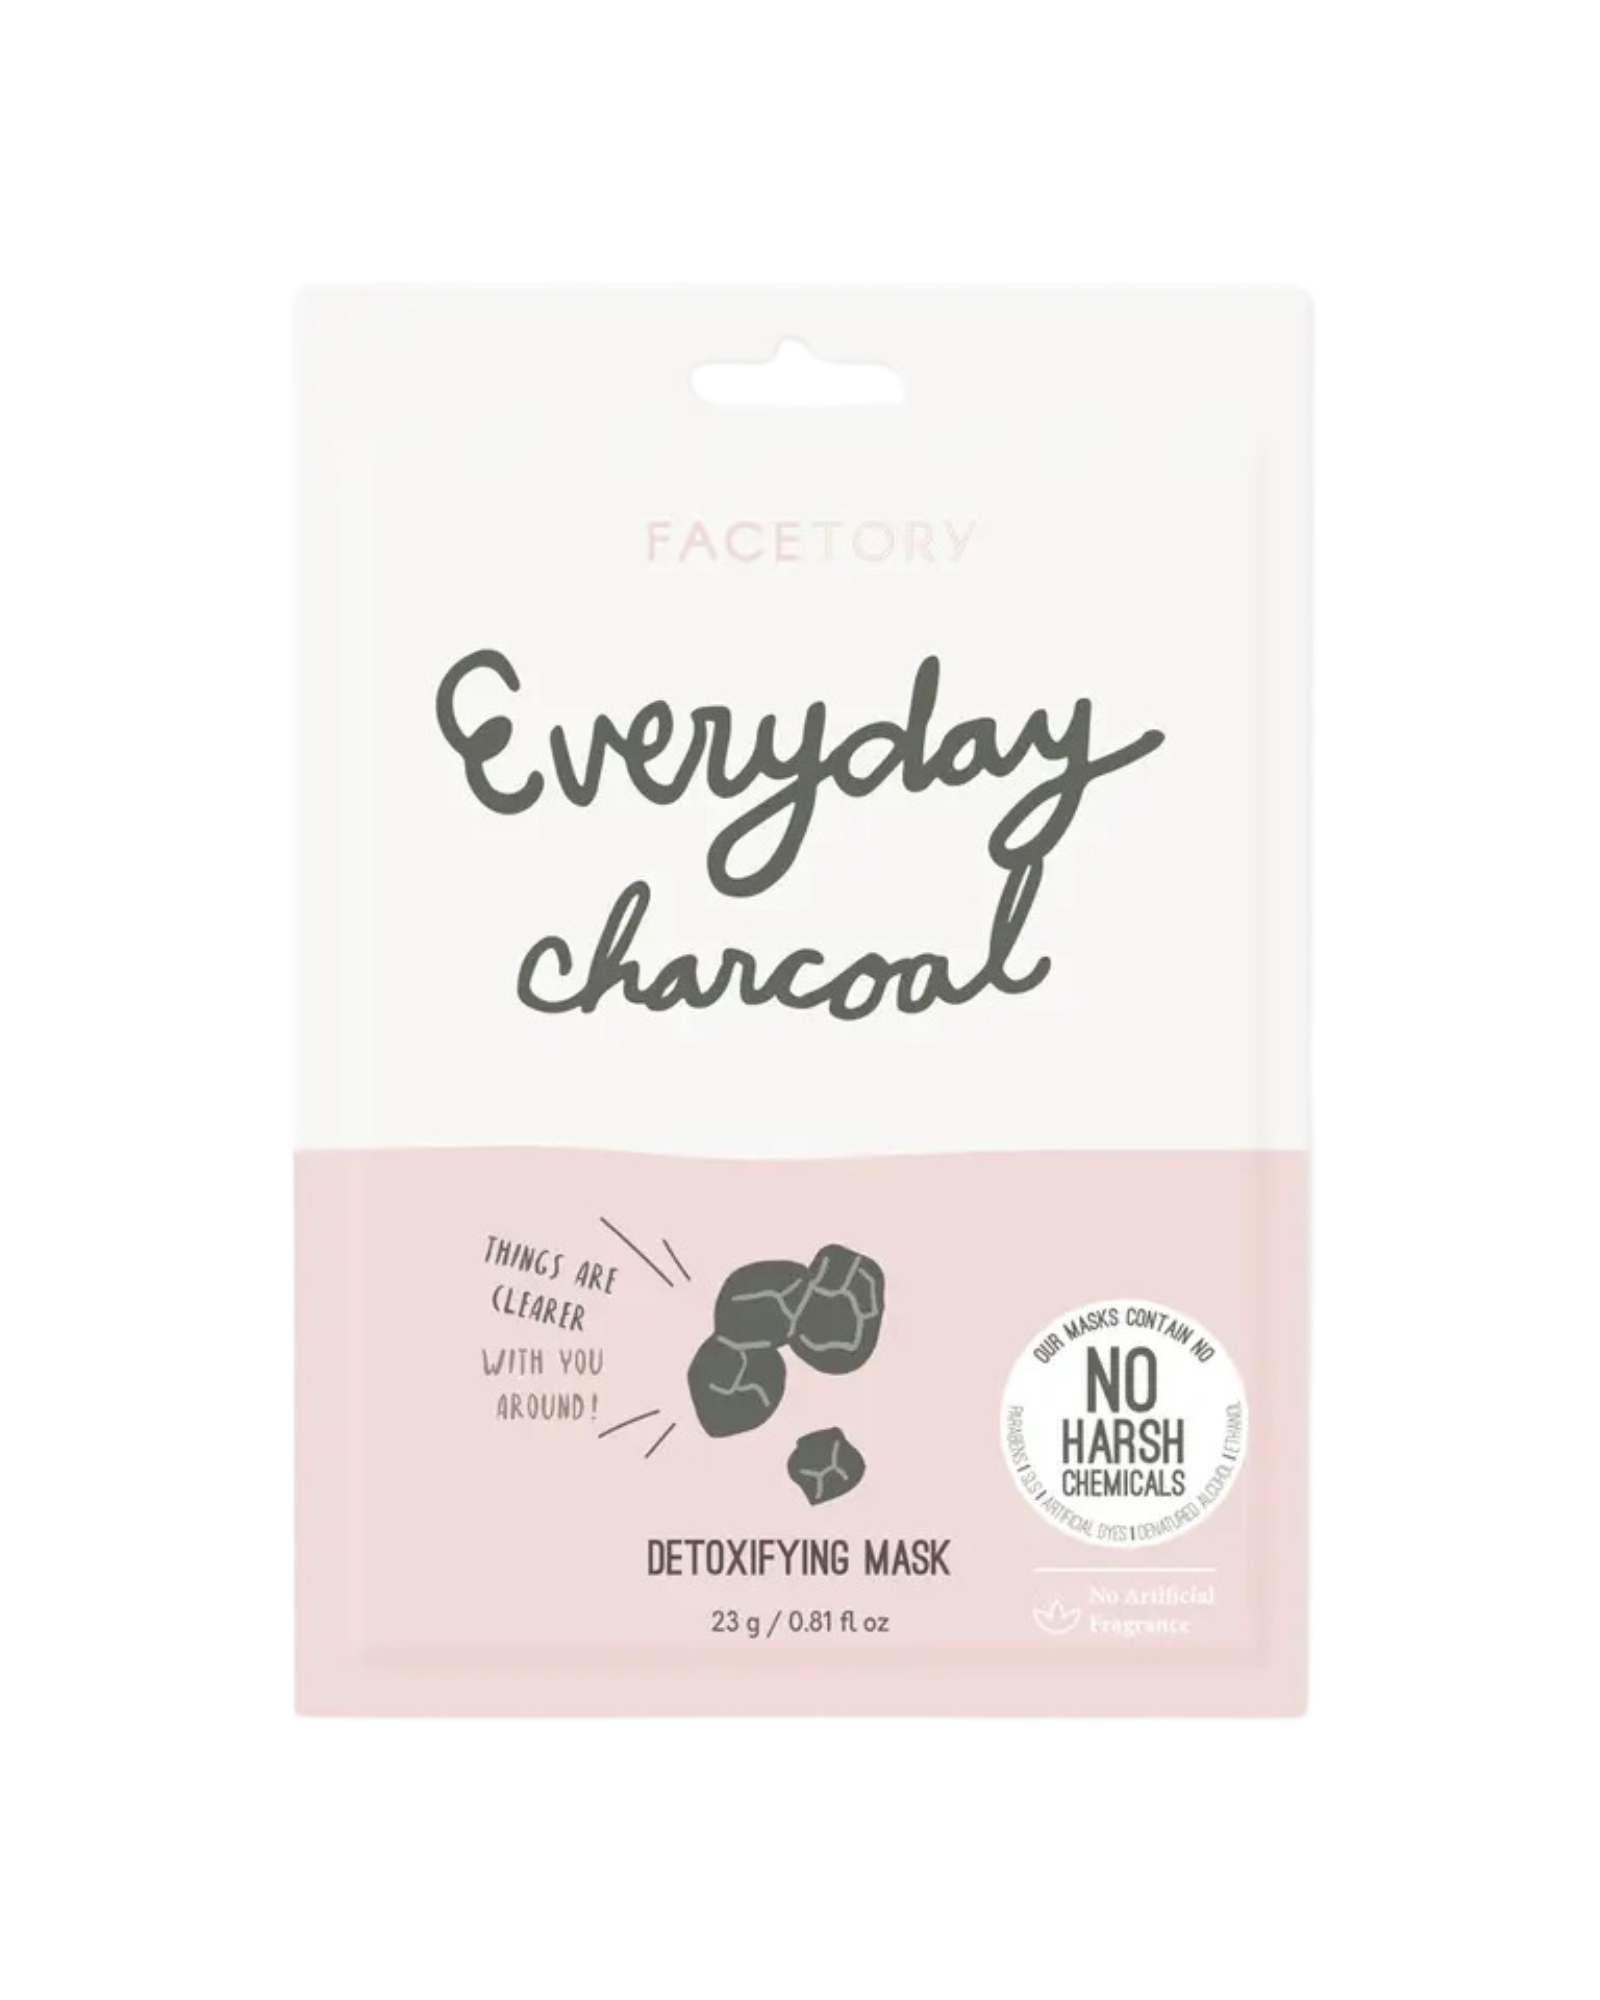 White and light pink face mask packaging with the words "everyday charcoal" 